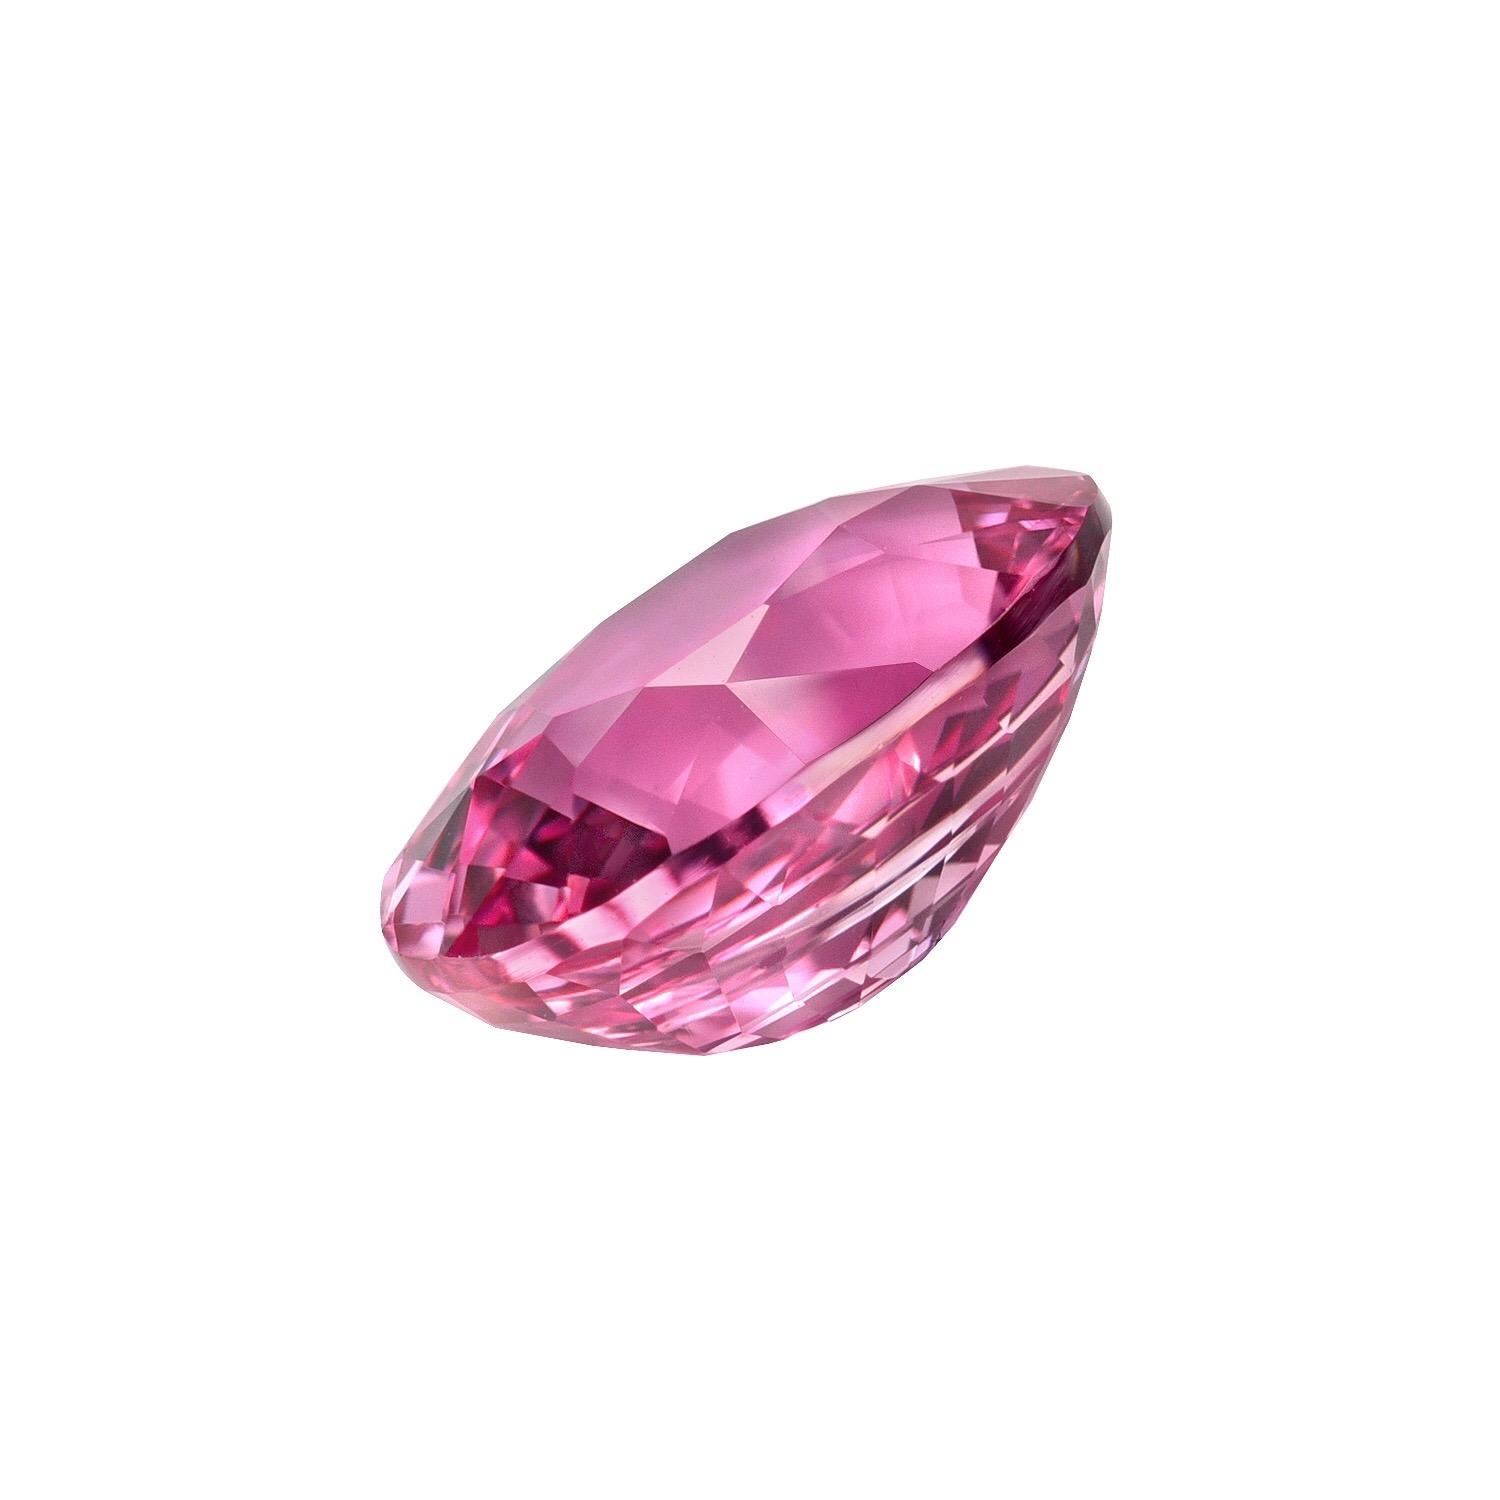 Superb 3.19 carat unheated Pink Sapphire oval gem, offered loose to a world-class gemstone connoisseur.
The GIA certificate is attached to the image selection for your reference.
Returns are accepted and paid by us within 7 days of delivery.
We